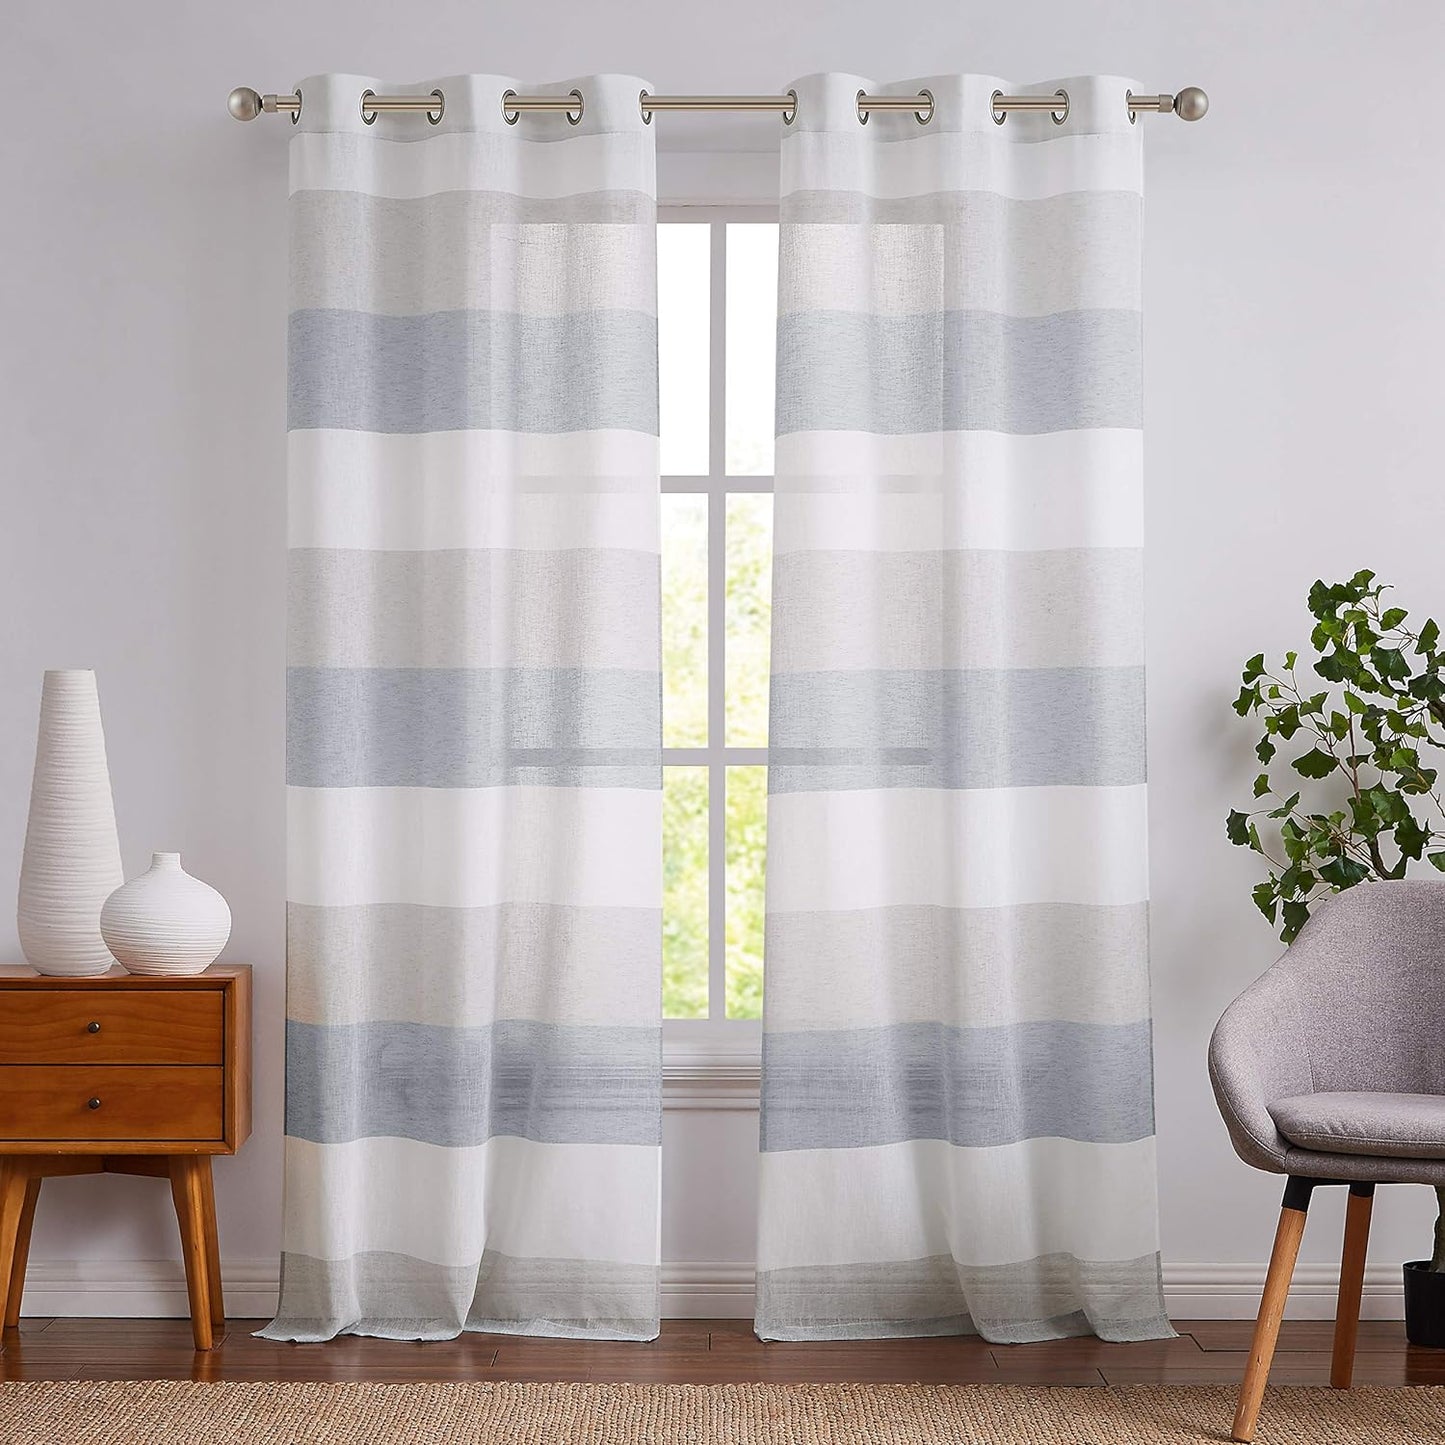 Central Park Gray Tan Stripe Sheer Color Block Window Curtain Panel Linen Window Treatment for Bedroom Living Room Farmhouse 84 Inches Long with Grommets, 2 Panel Rustic Drapes  Central Park Gray/Smoke Blue 40"X63"X2 